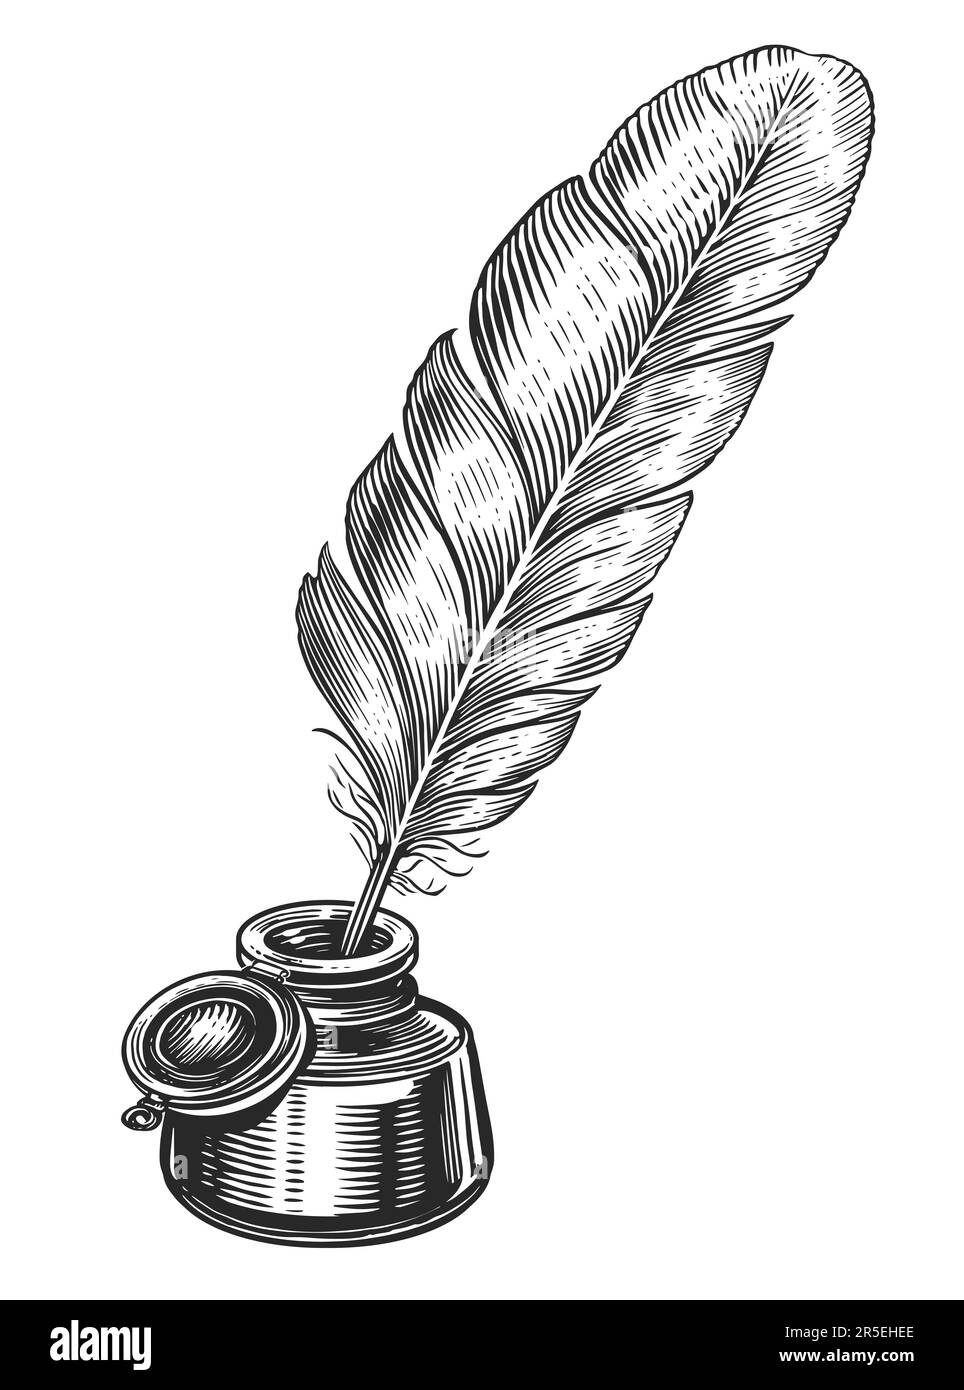 Black and white illustration of quill pen For sale as Framed Prints,  Photos, Wall Art and Photo Gifts